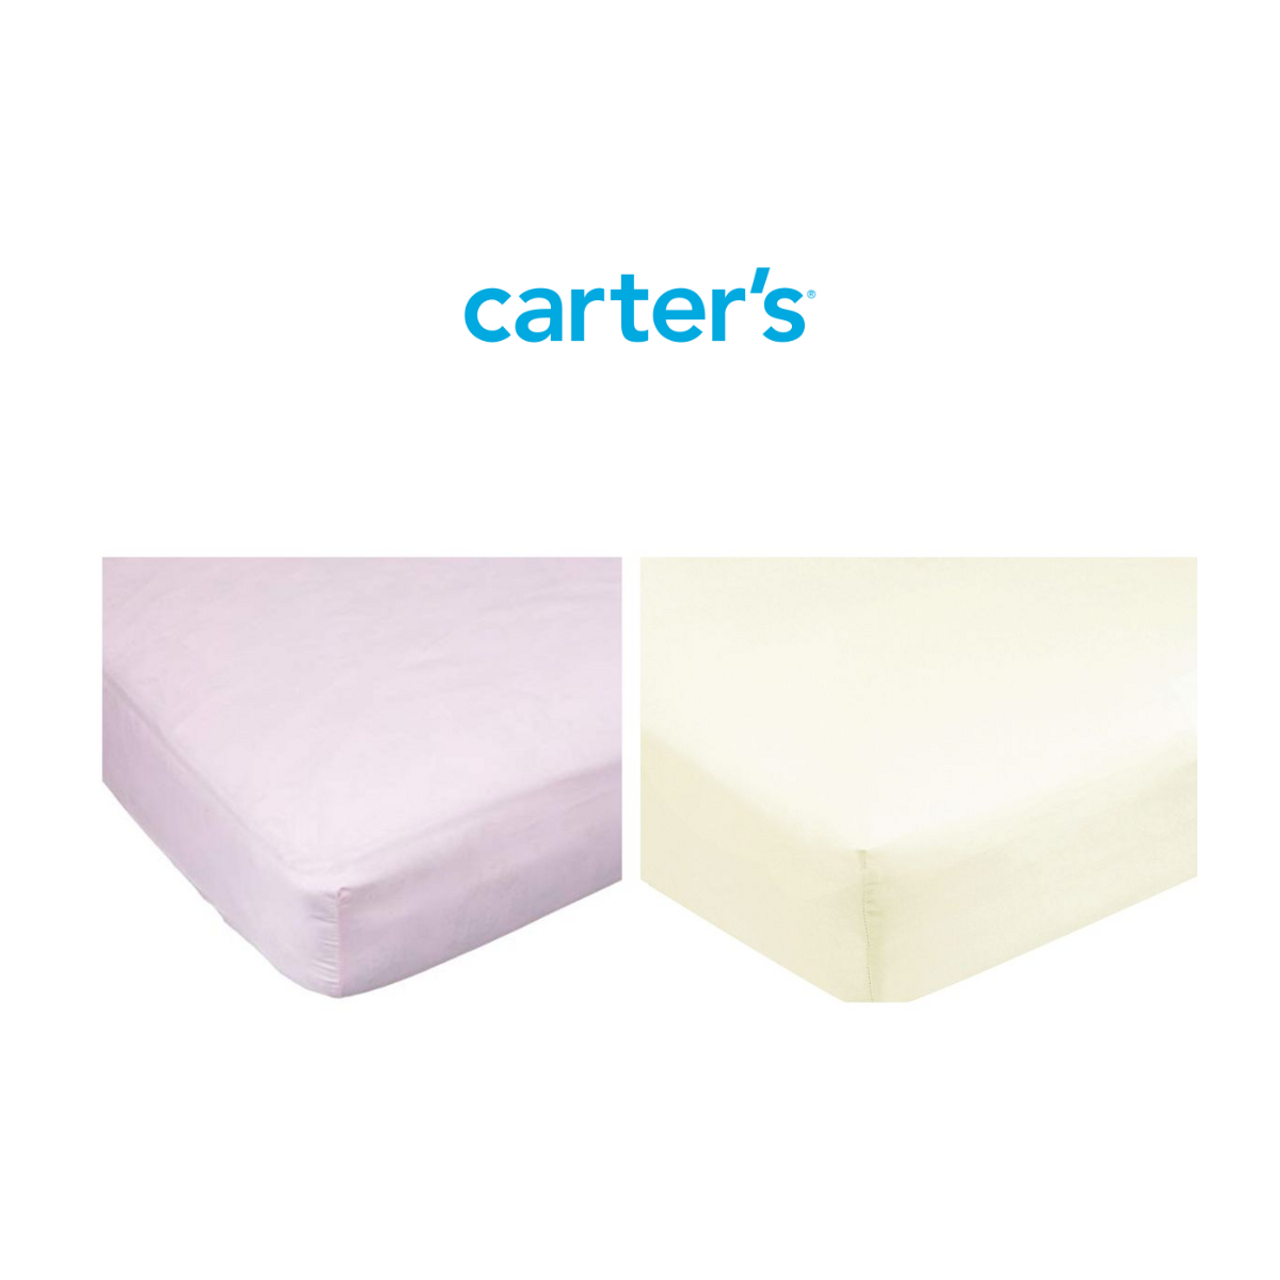 Carter's Easy Fit Crib Mattress Fitted Sheet product image